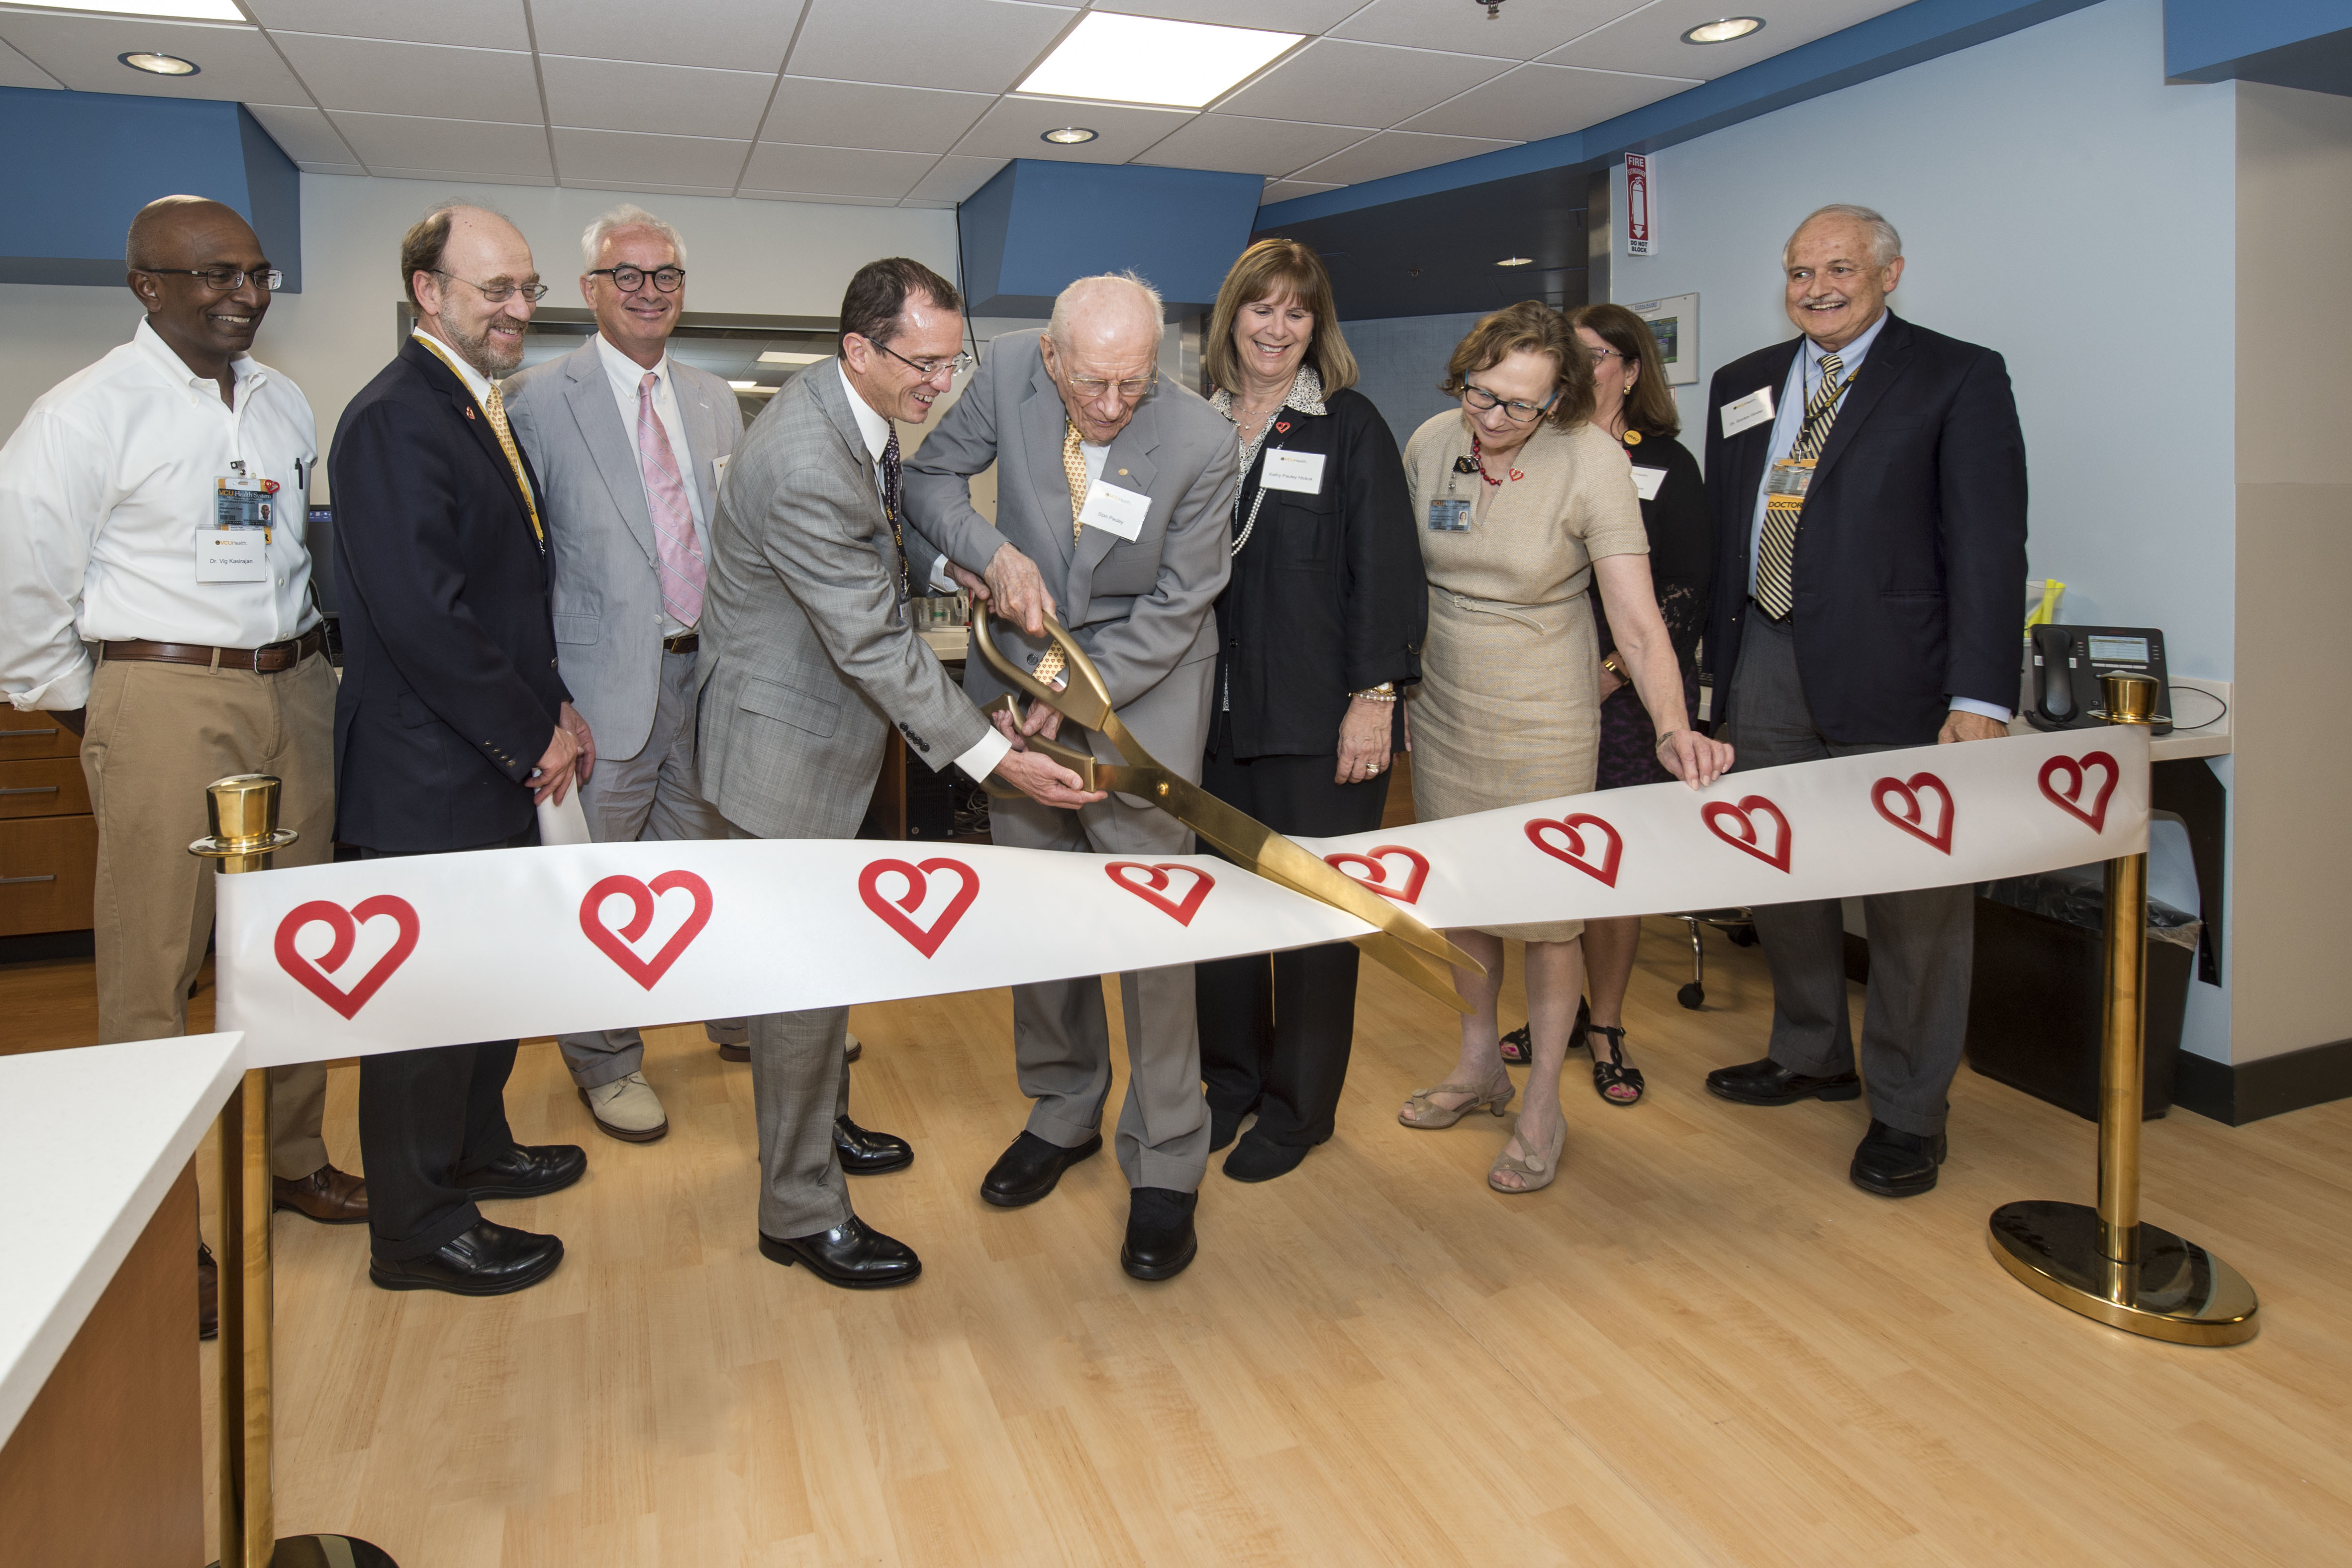 Pauley and VCU Health leaders cut the ribbon on a new cardiac imaging suite at the Pauley Heart Center in 2018. (Kevin Morley, University Marketing)